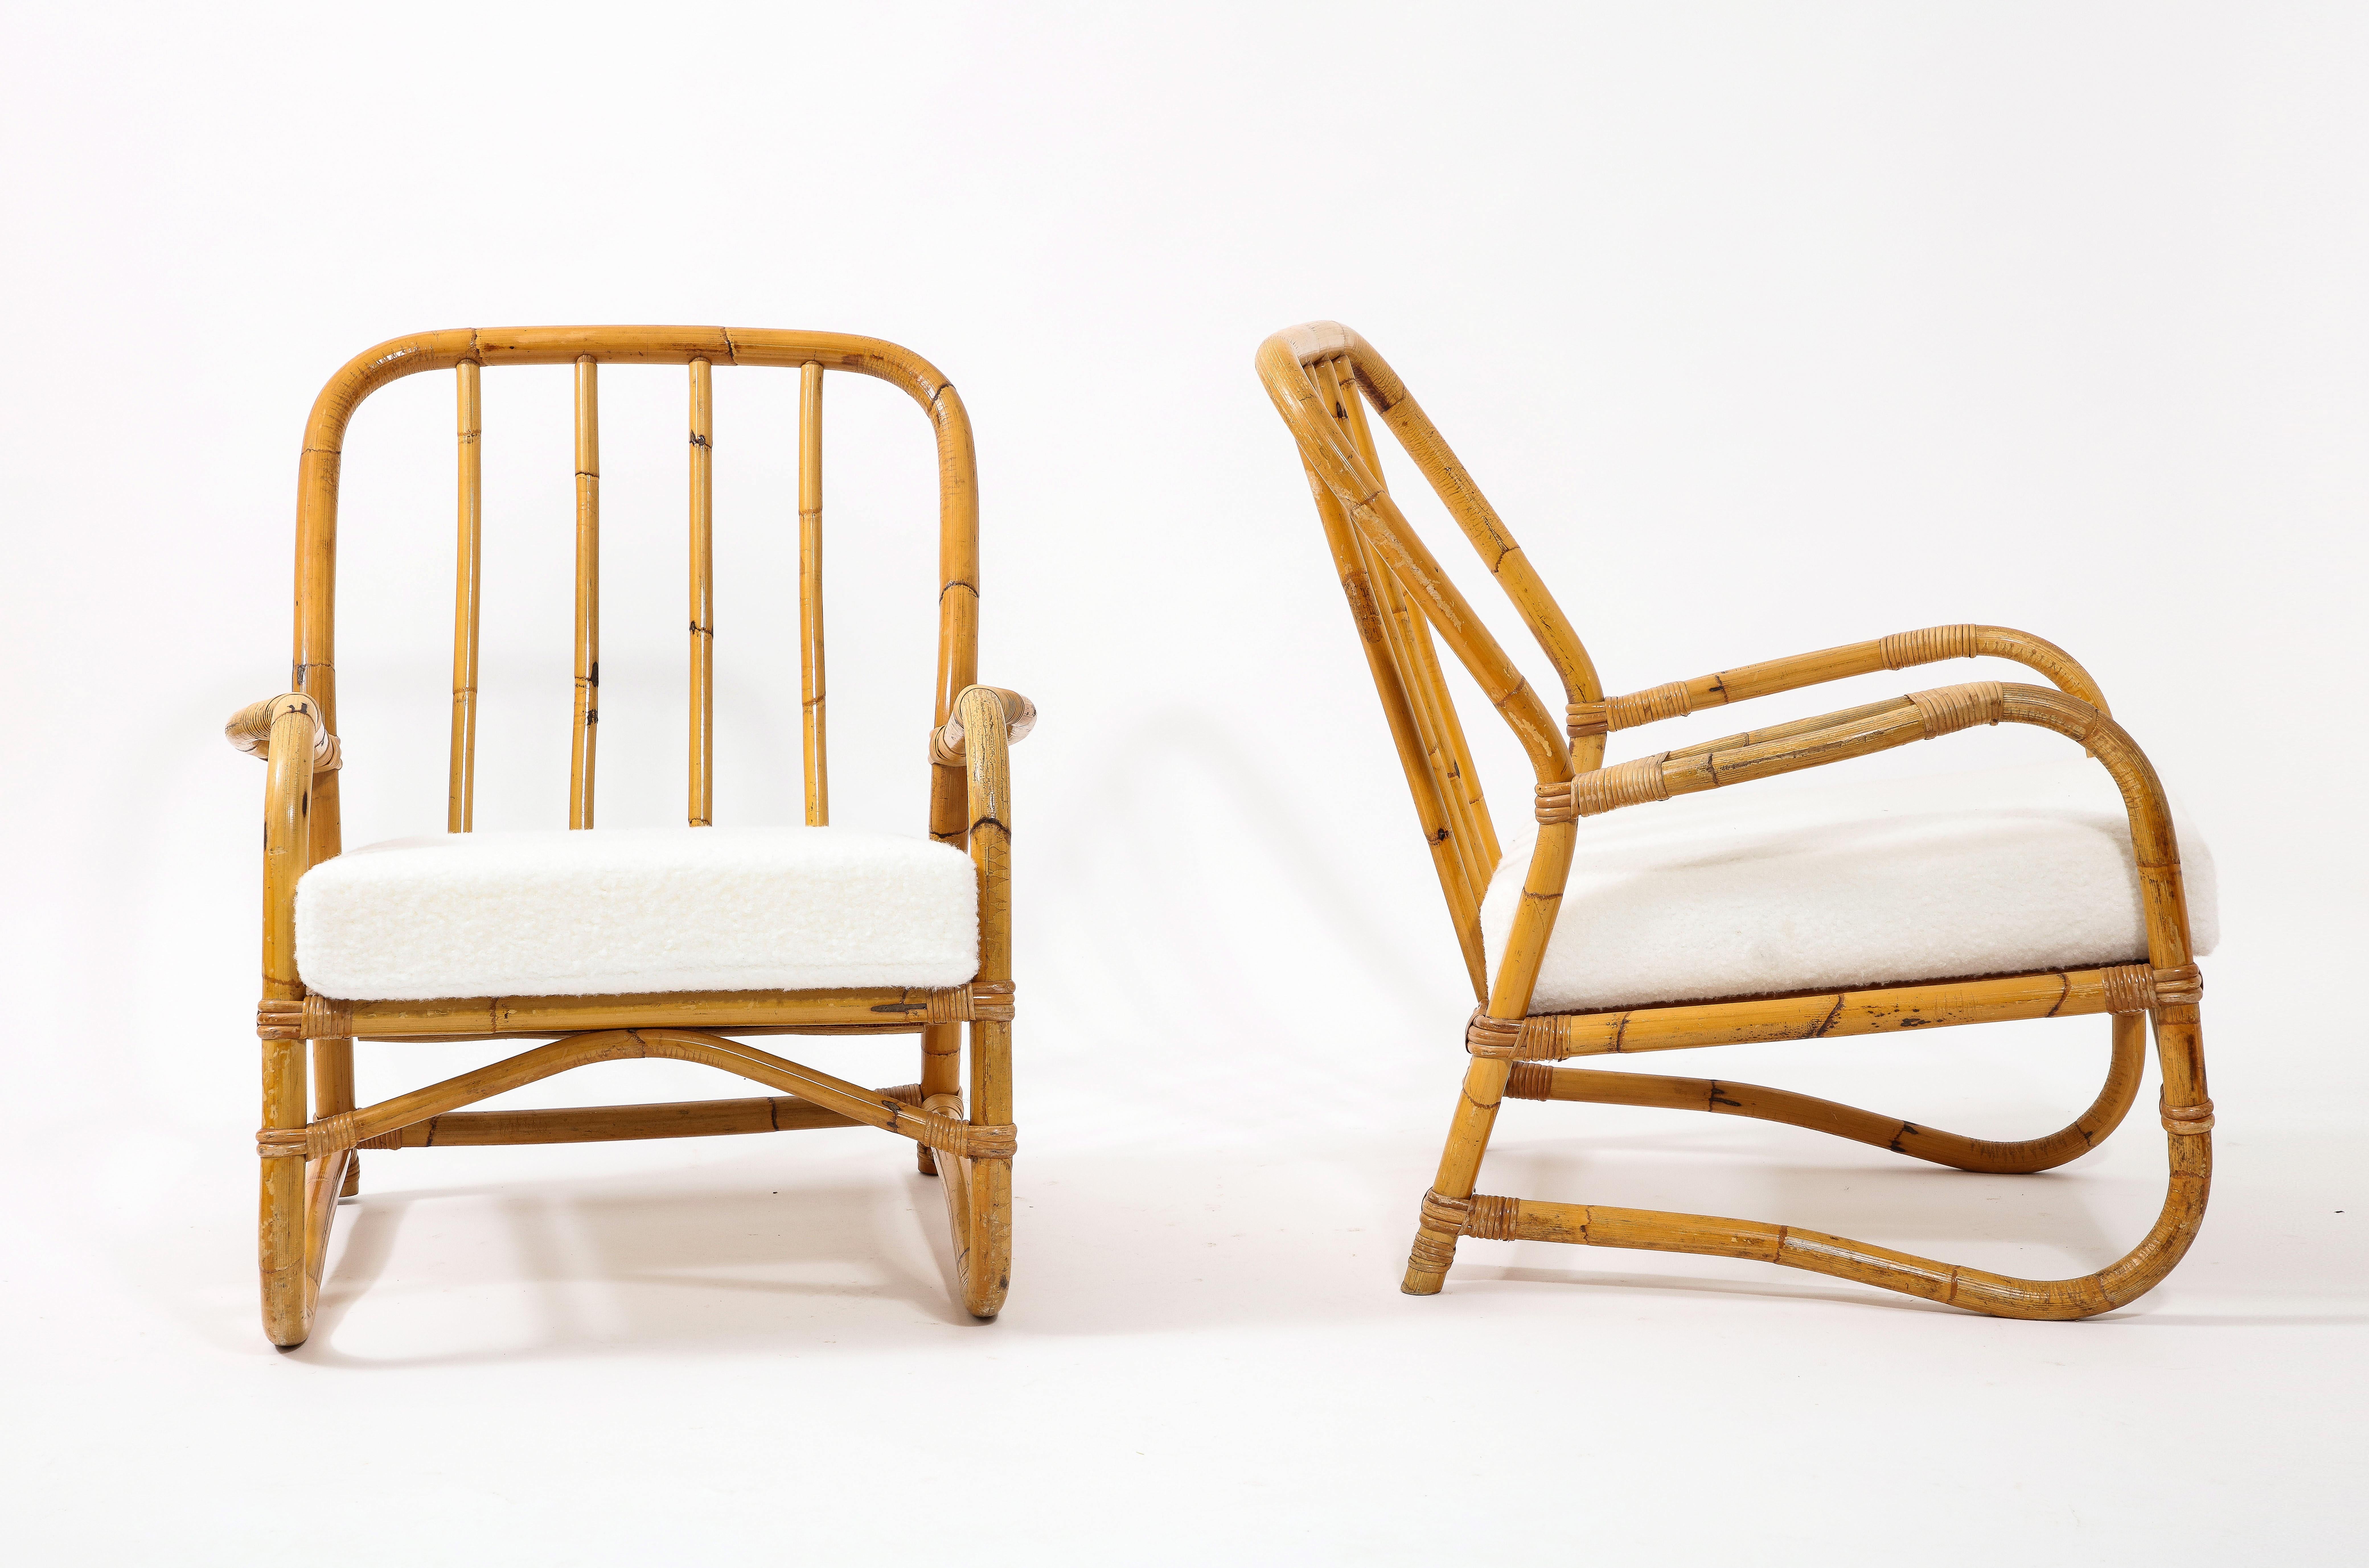 Hand-Woven Louis Sognot Style Pair of Curved Bamboo Armchairs, France 1950's For Sale